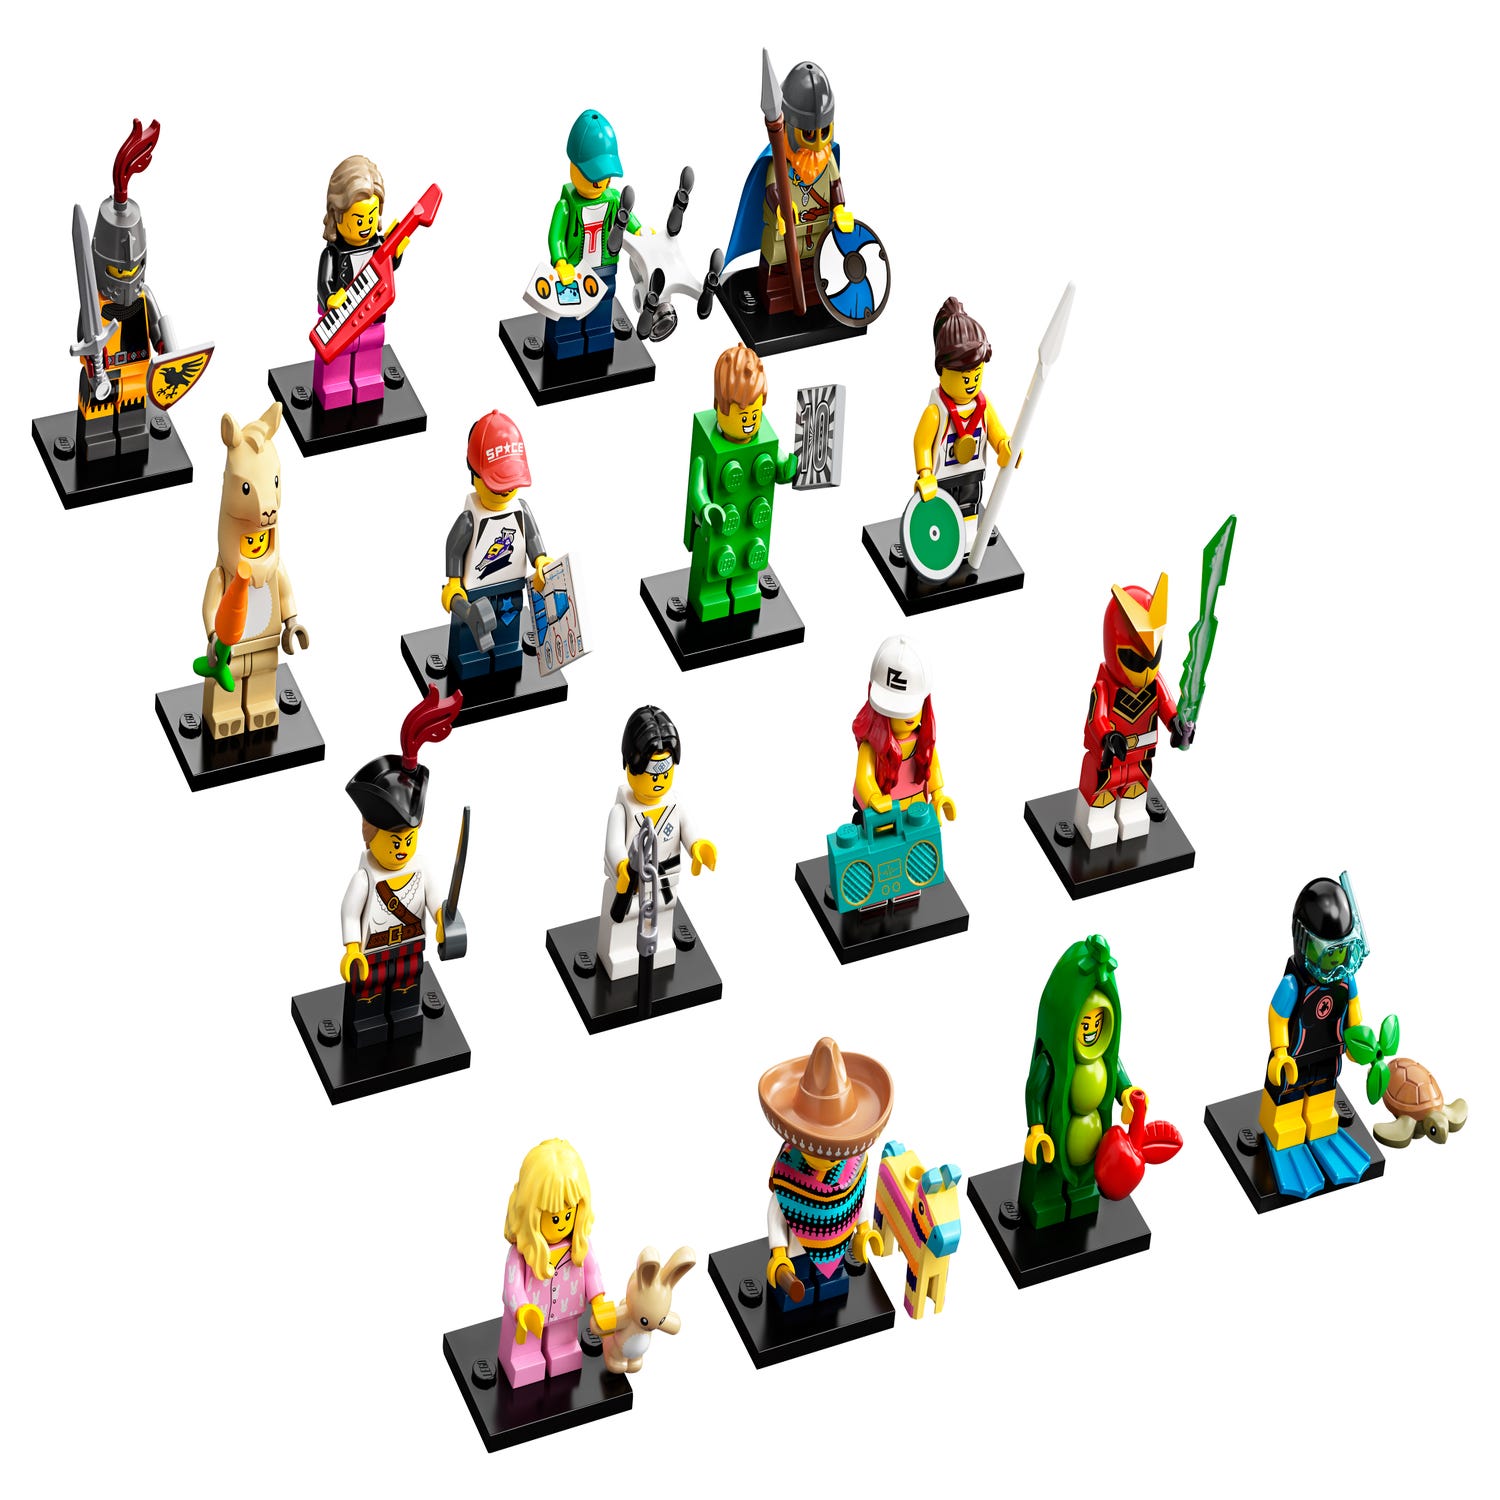 Series 20 71027 Minifigures Buy Online At The Official